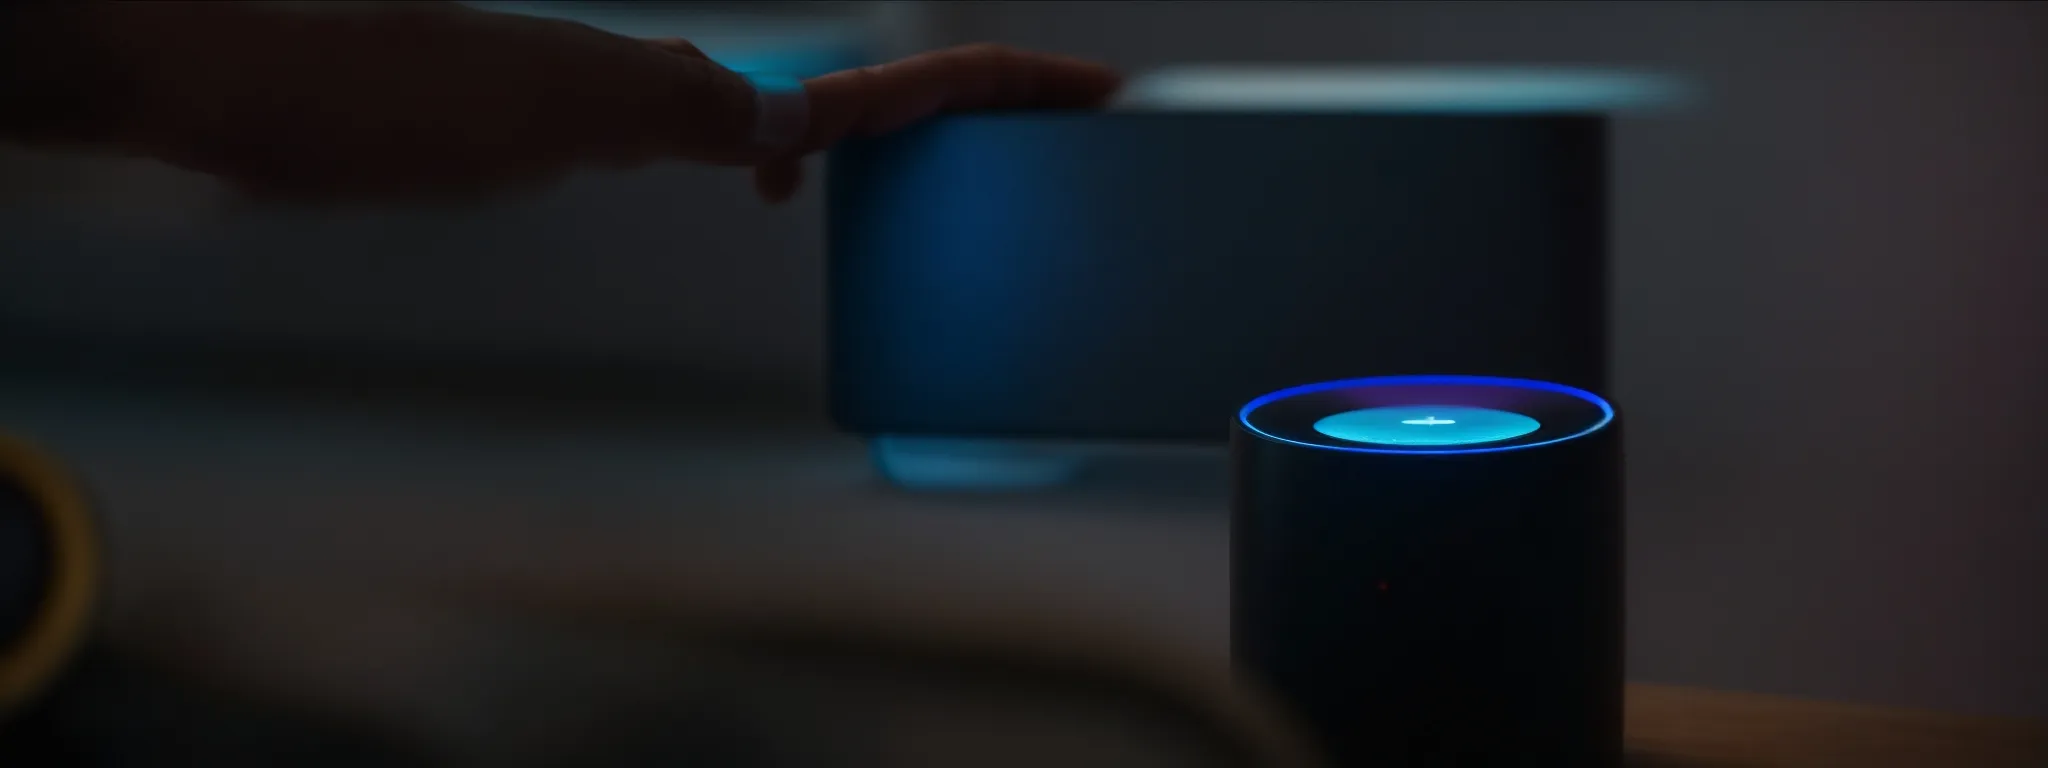 a person speaks into a smart speaker, as the device's lights glow in response.